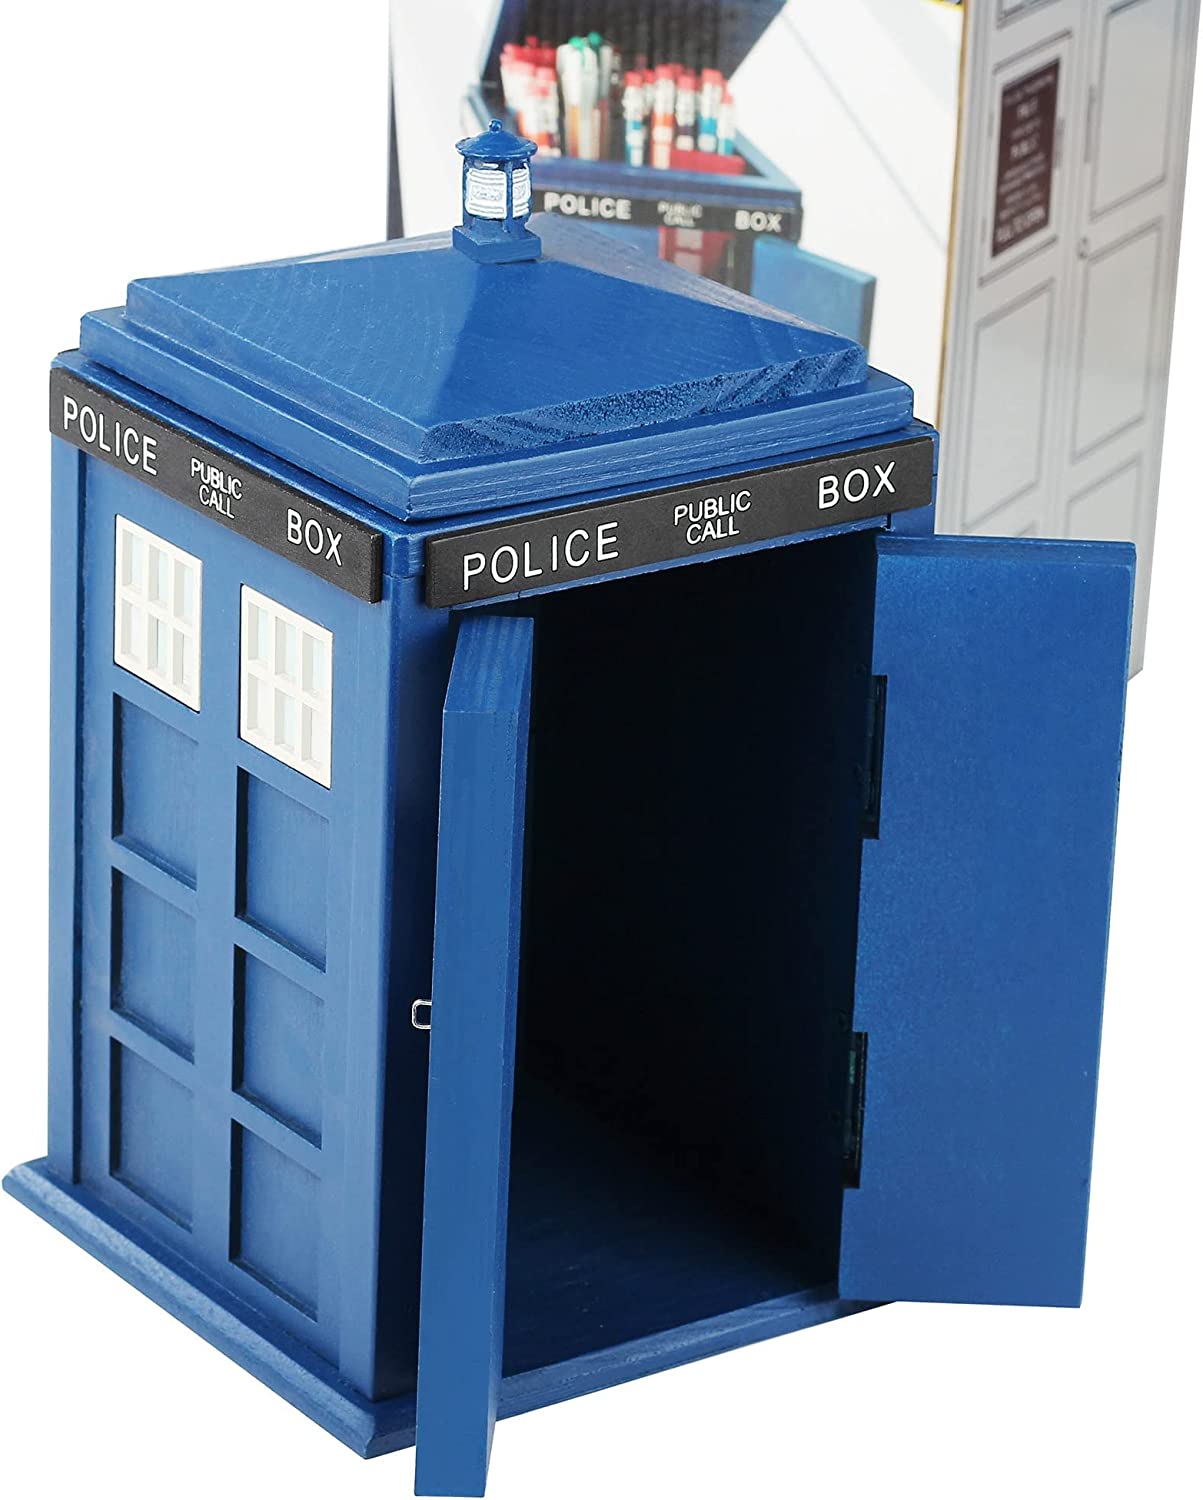 A storage container shaped like the Tardis from Doctor Who. The doors are open showing the inside of the container.